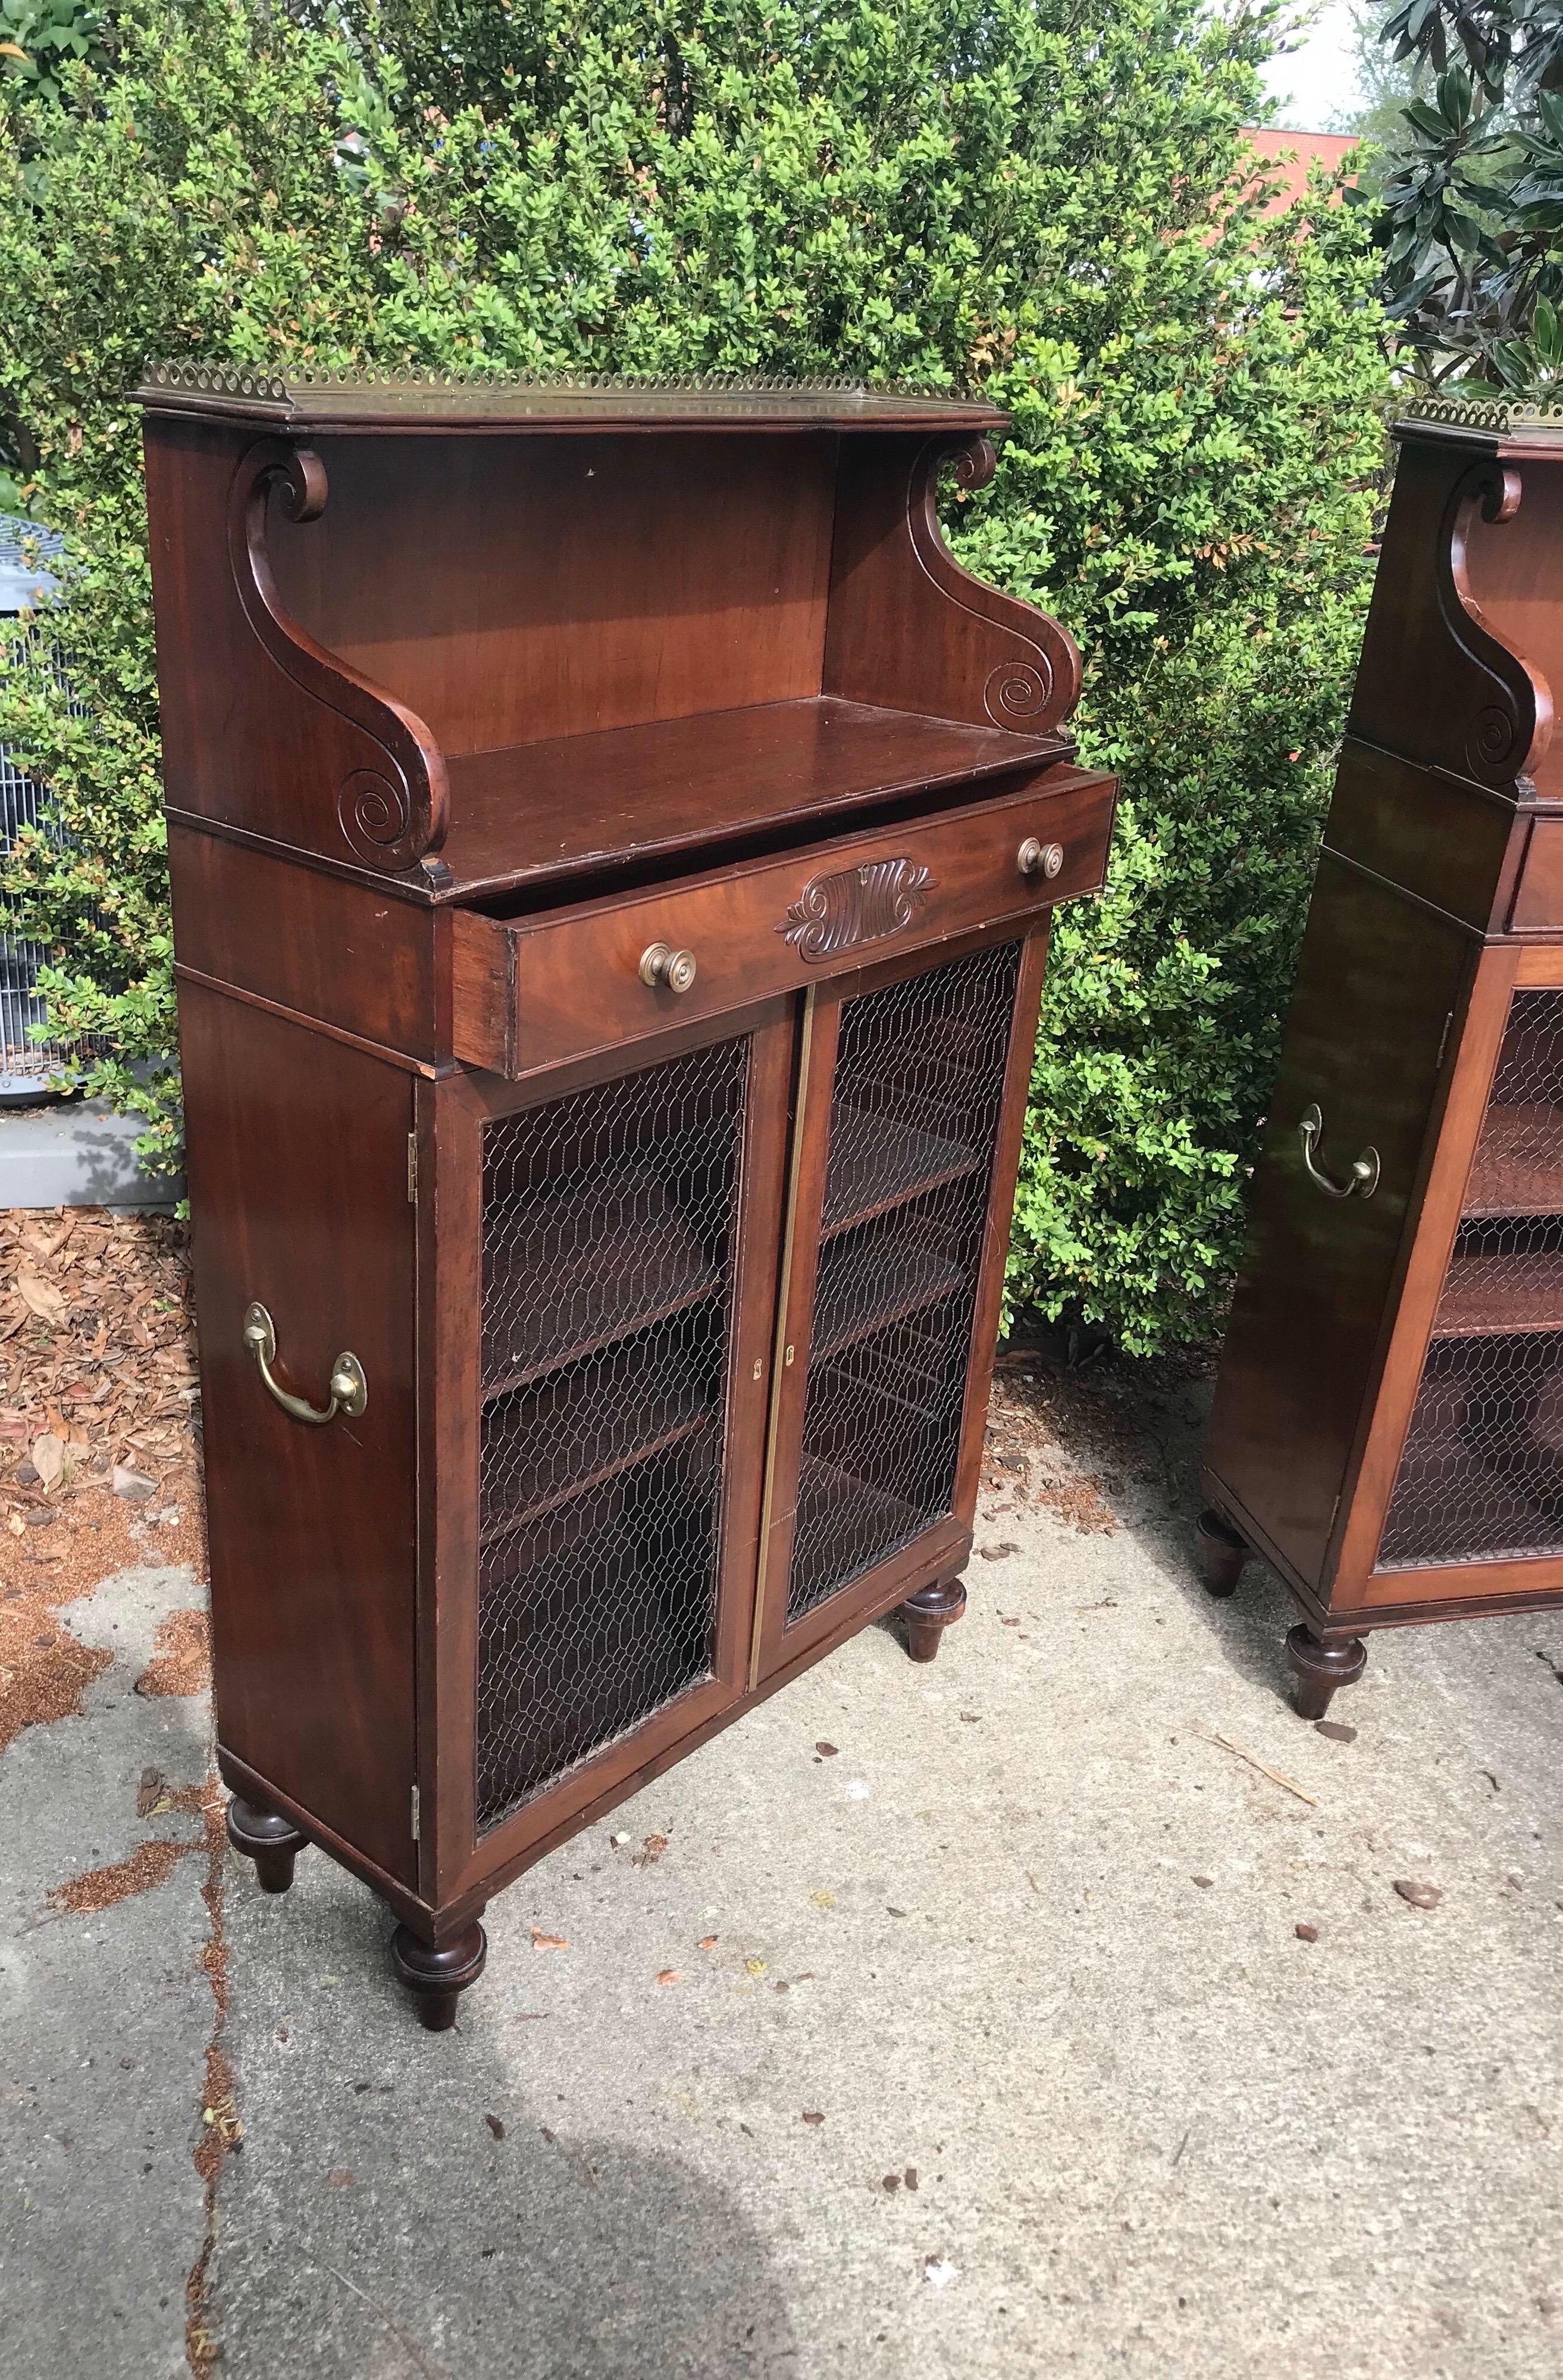 Handsome pair of petite 19th century English Regency mahogany cabinets with wire grill work, brass-mounted pulls, handles and decorative trip around the tops. Great sized cabinets that could be used as petite bookshelves or etageres.